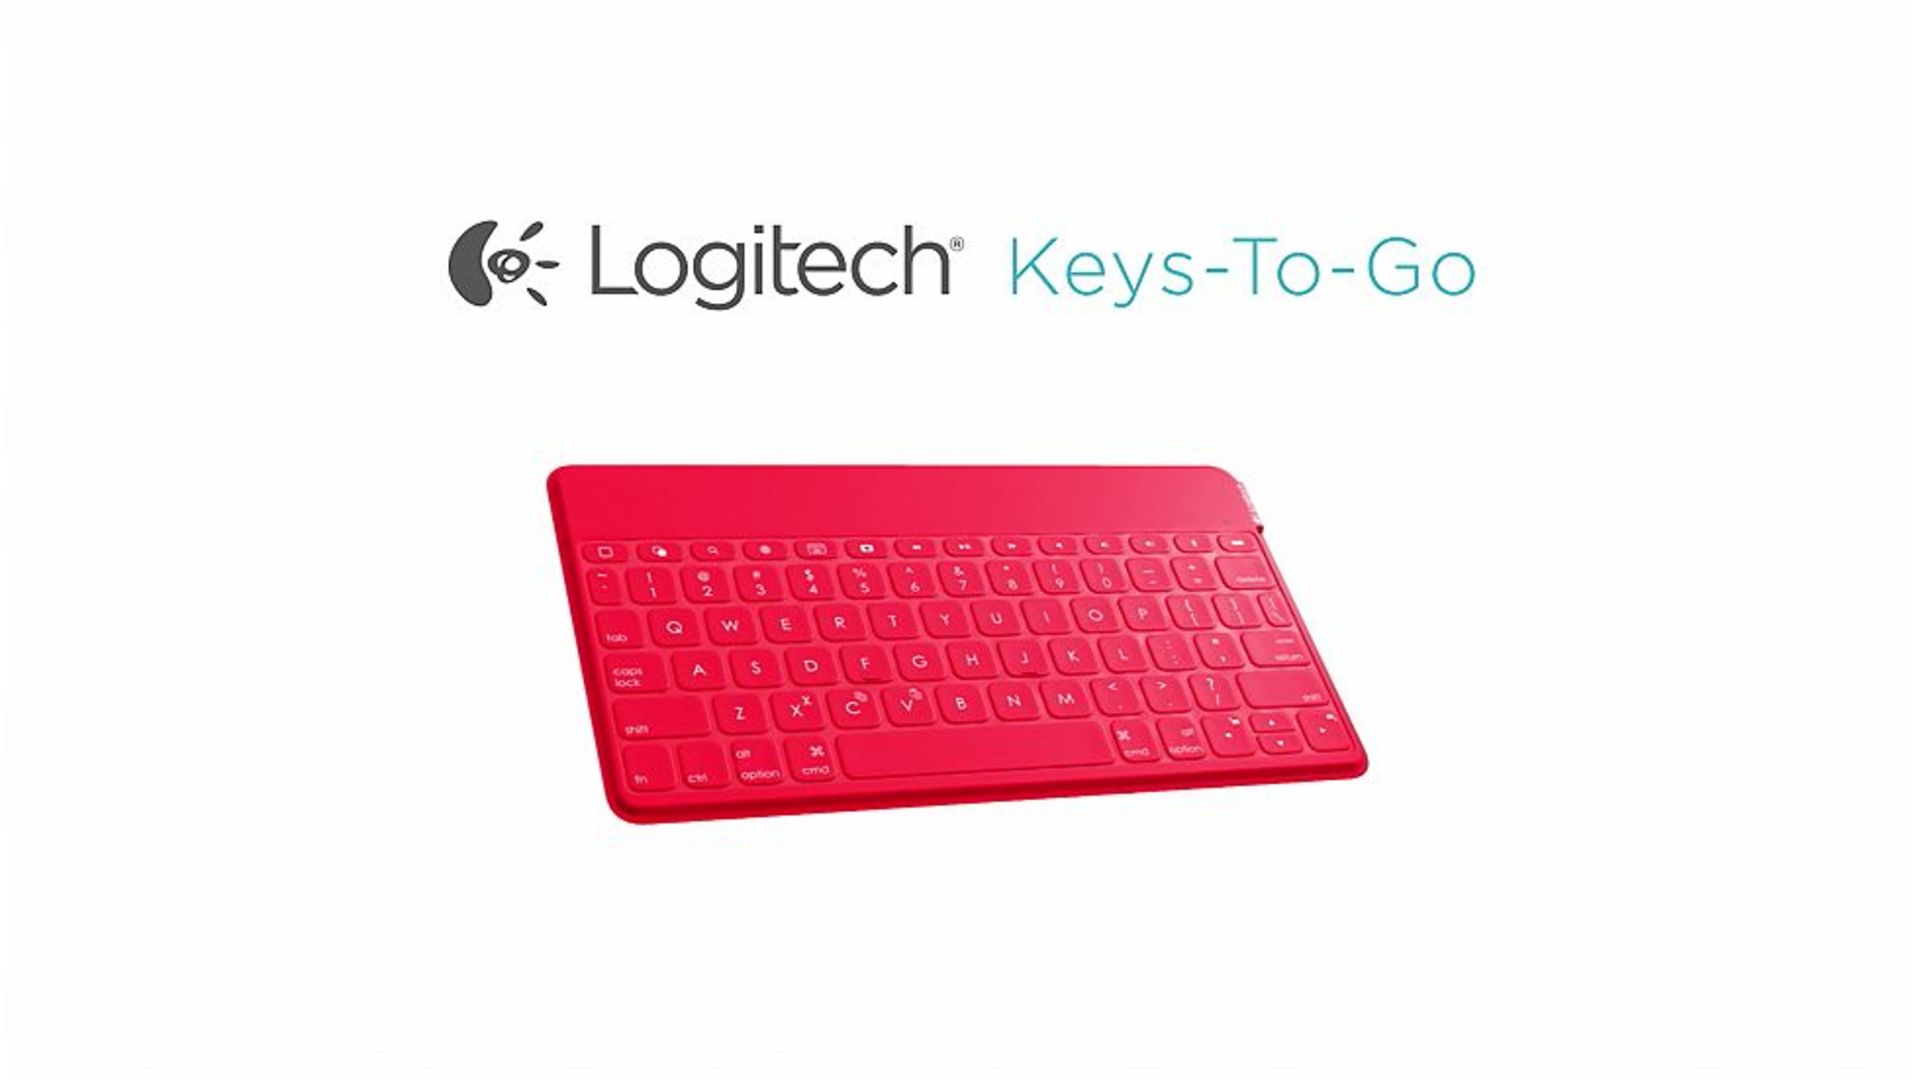 V *TRADE QTY* Brand New Logitech Keys-to-Go Waterproof Wireless Keyboard for iPad iPhone and Apple